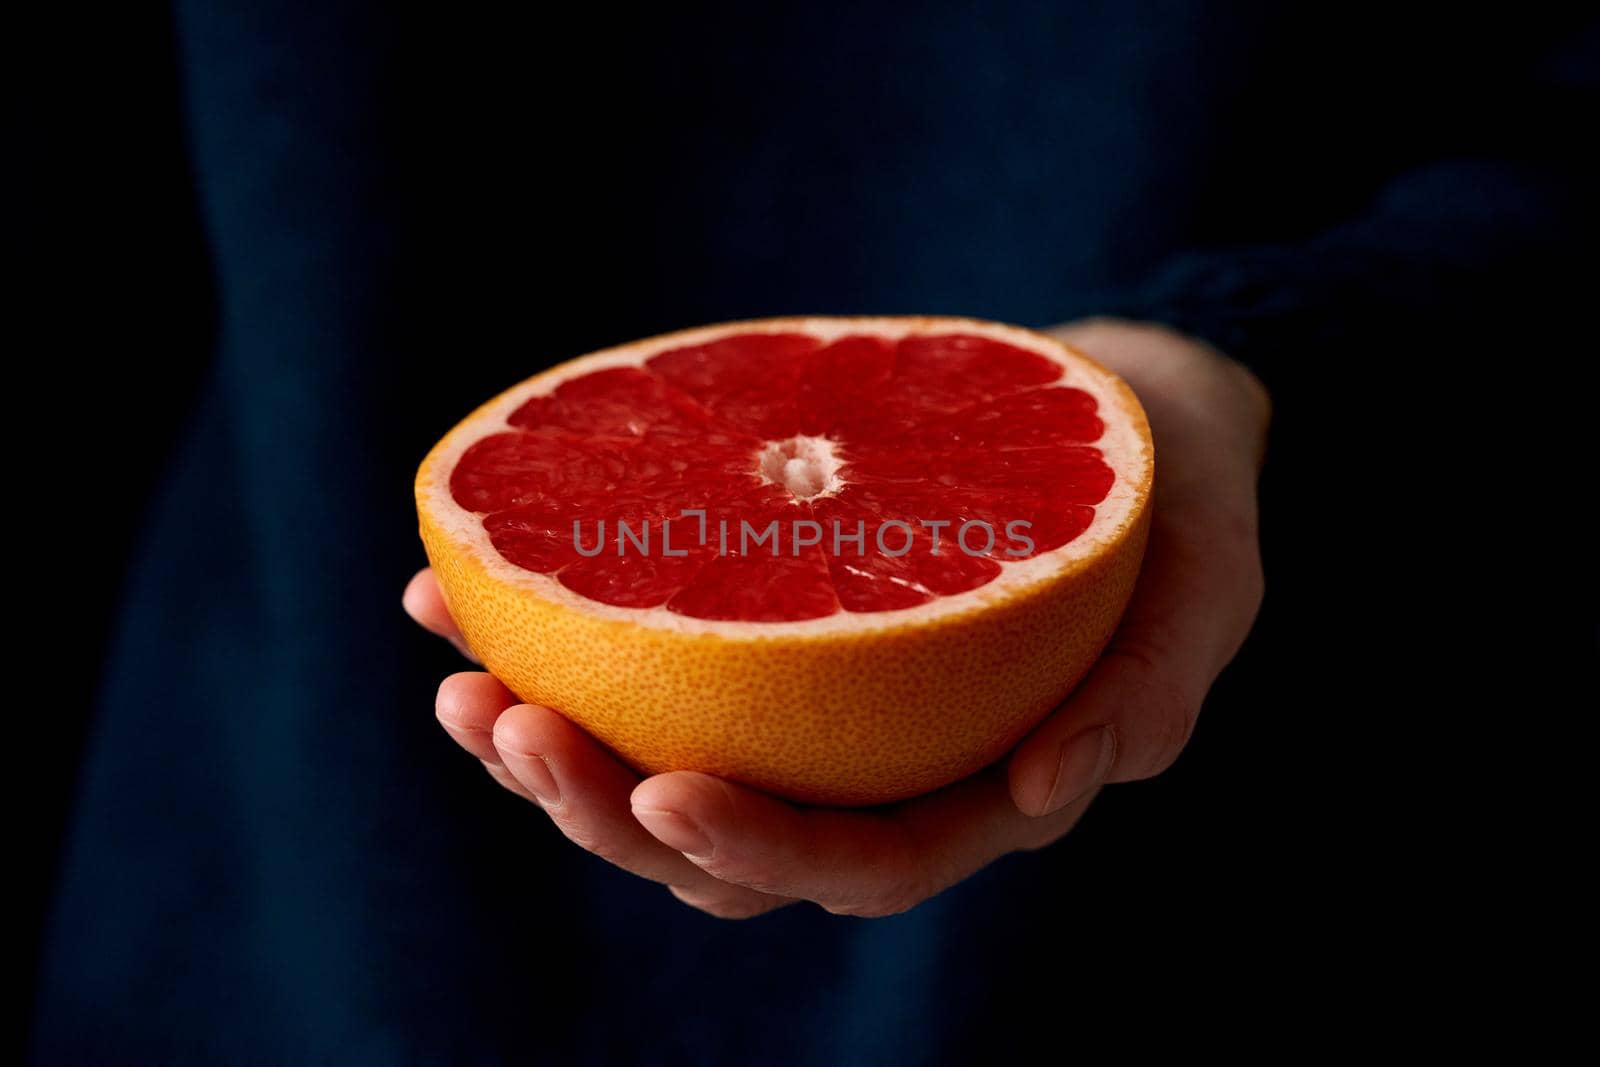 Close-up of woman's hand holding fresh halved red bright citrus fruit grapefruit on dark background. Lifestyle, natural light from window. Vitamins